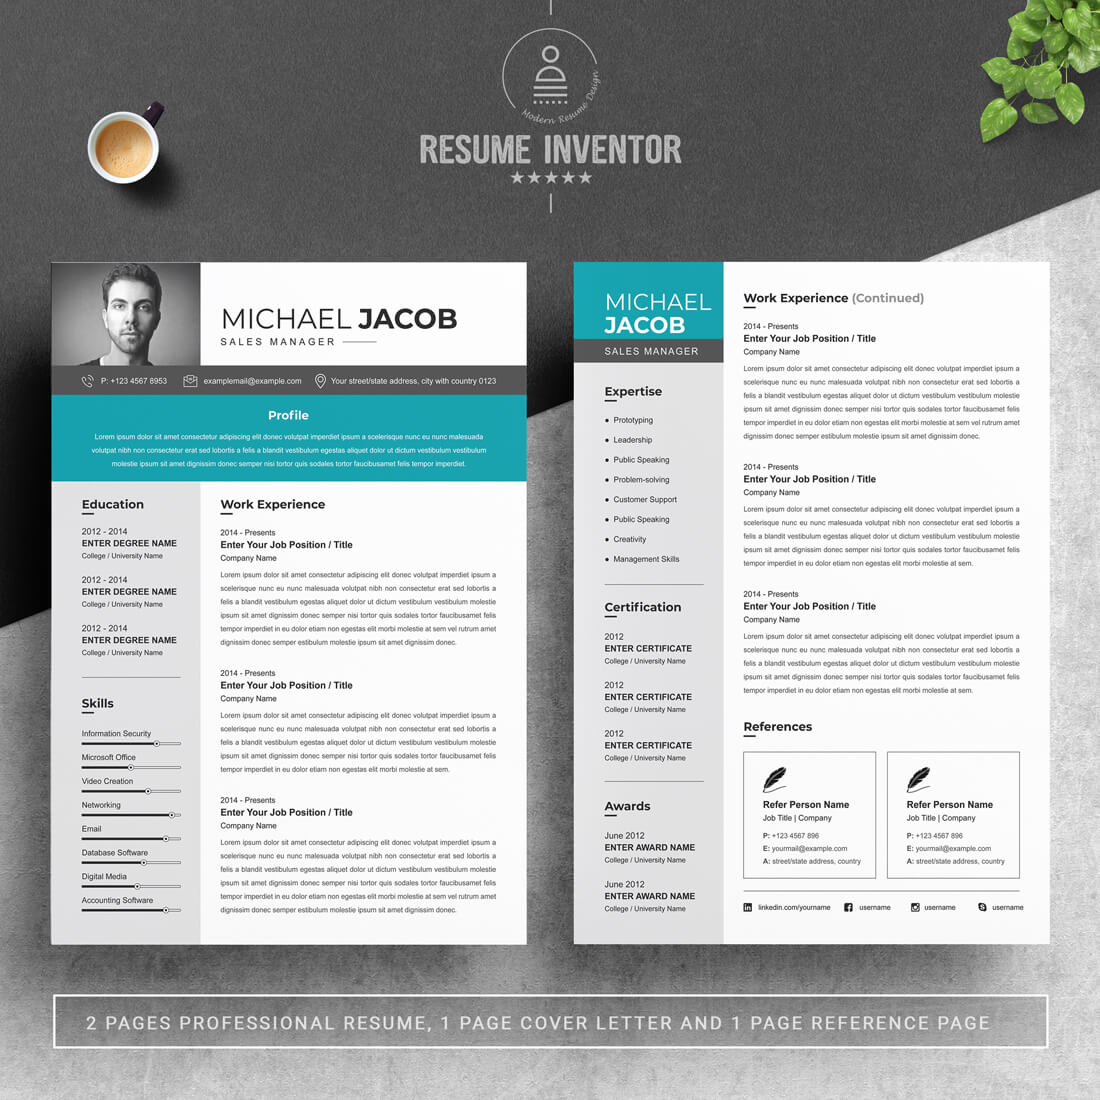 Sales Manager Curriculum Vitae Template Design cover image.